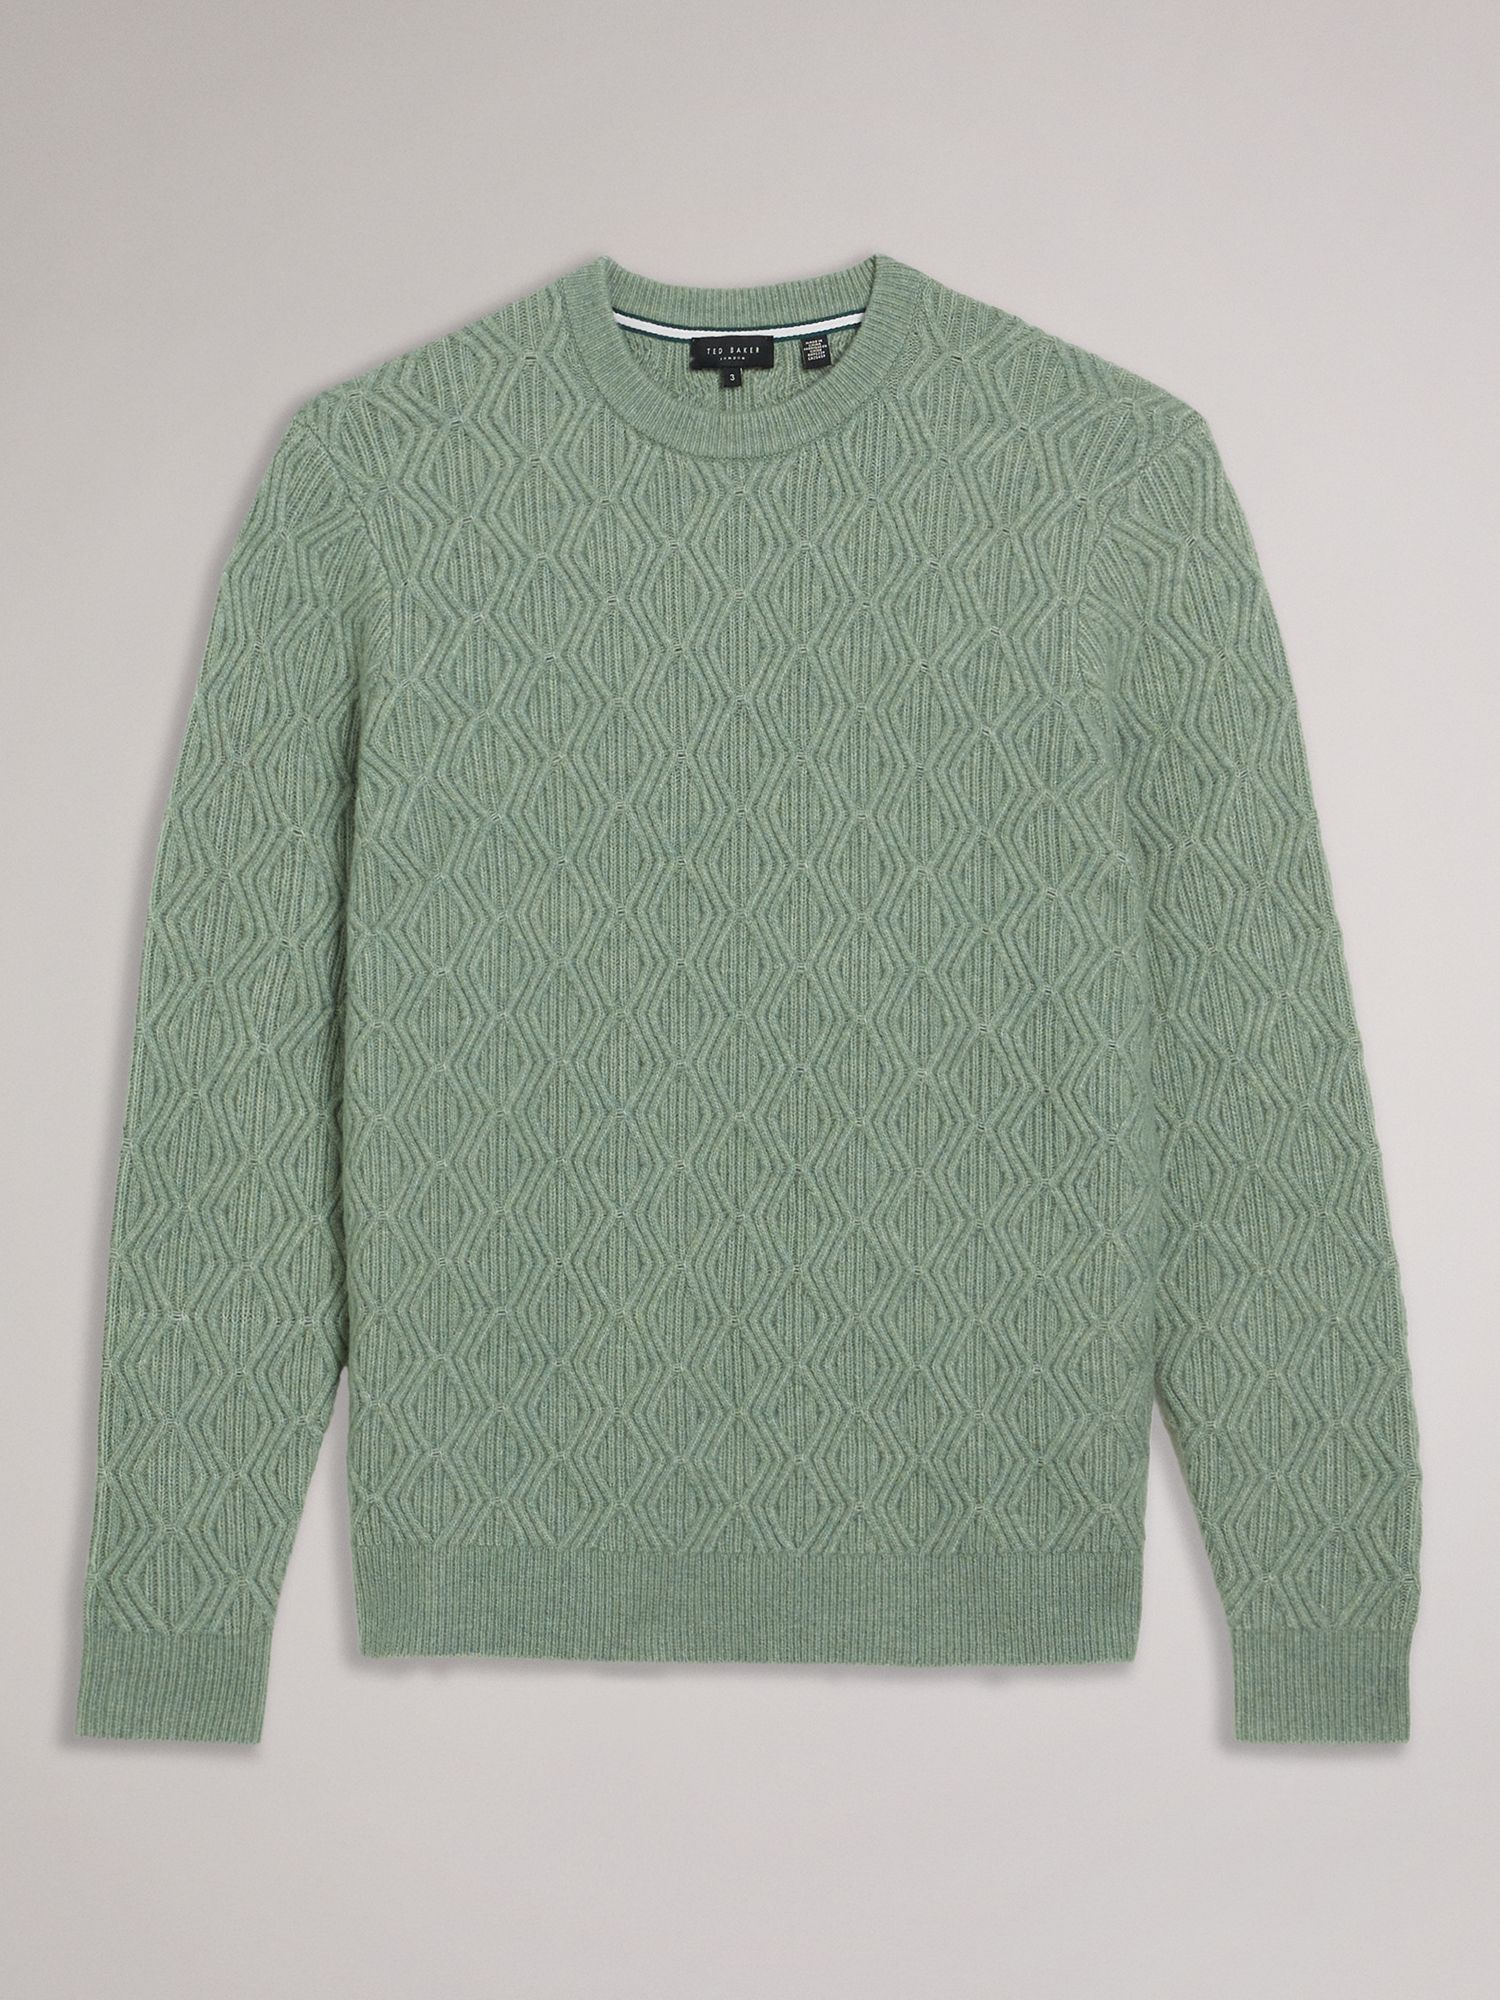 Ted Baker Atchet Long Sleeve Textured Cable Crew Neck Jumper, Light Green, L